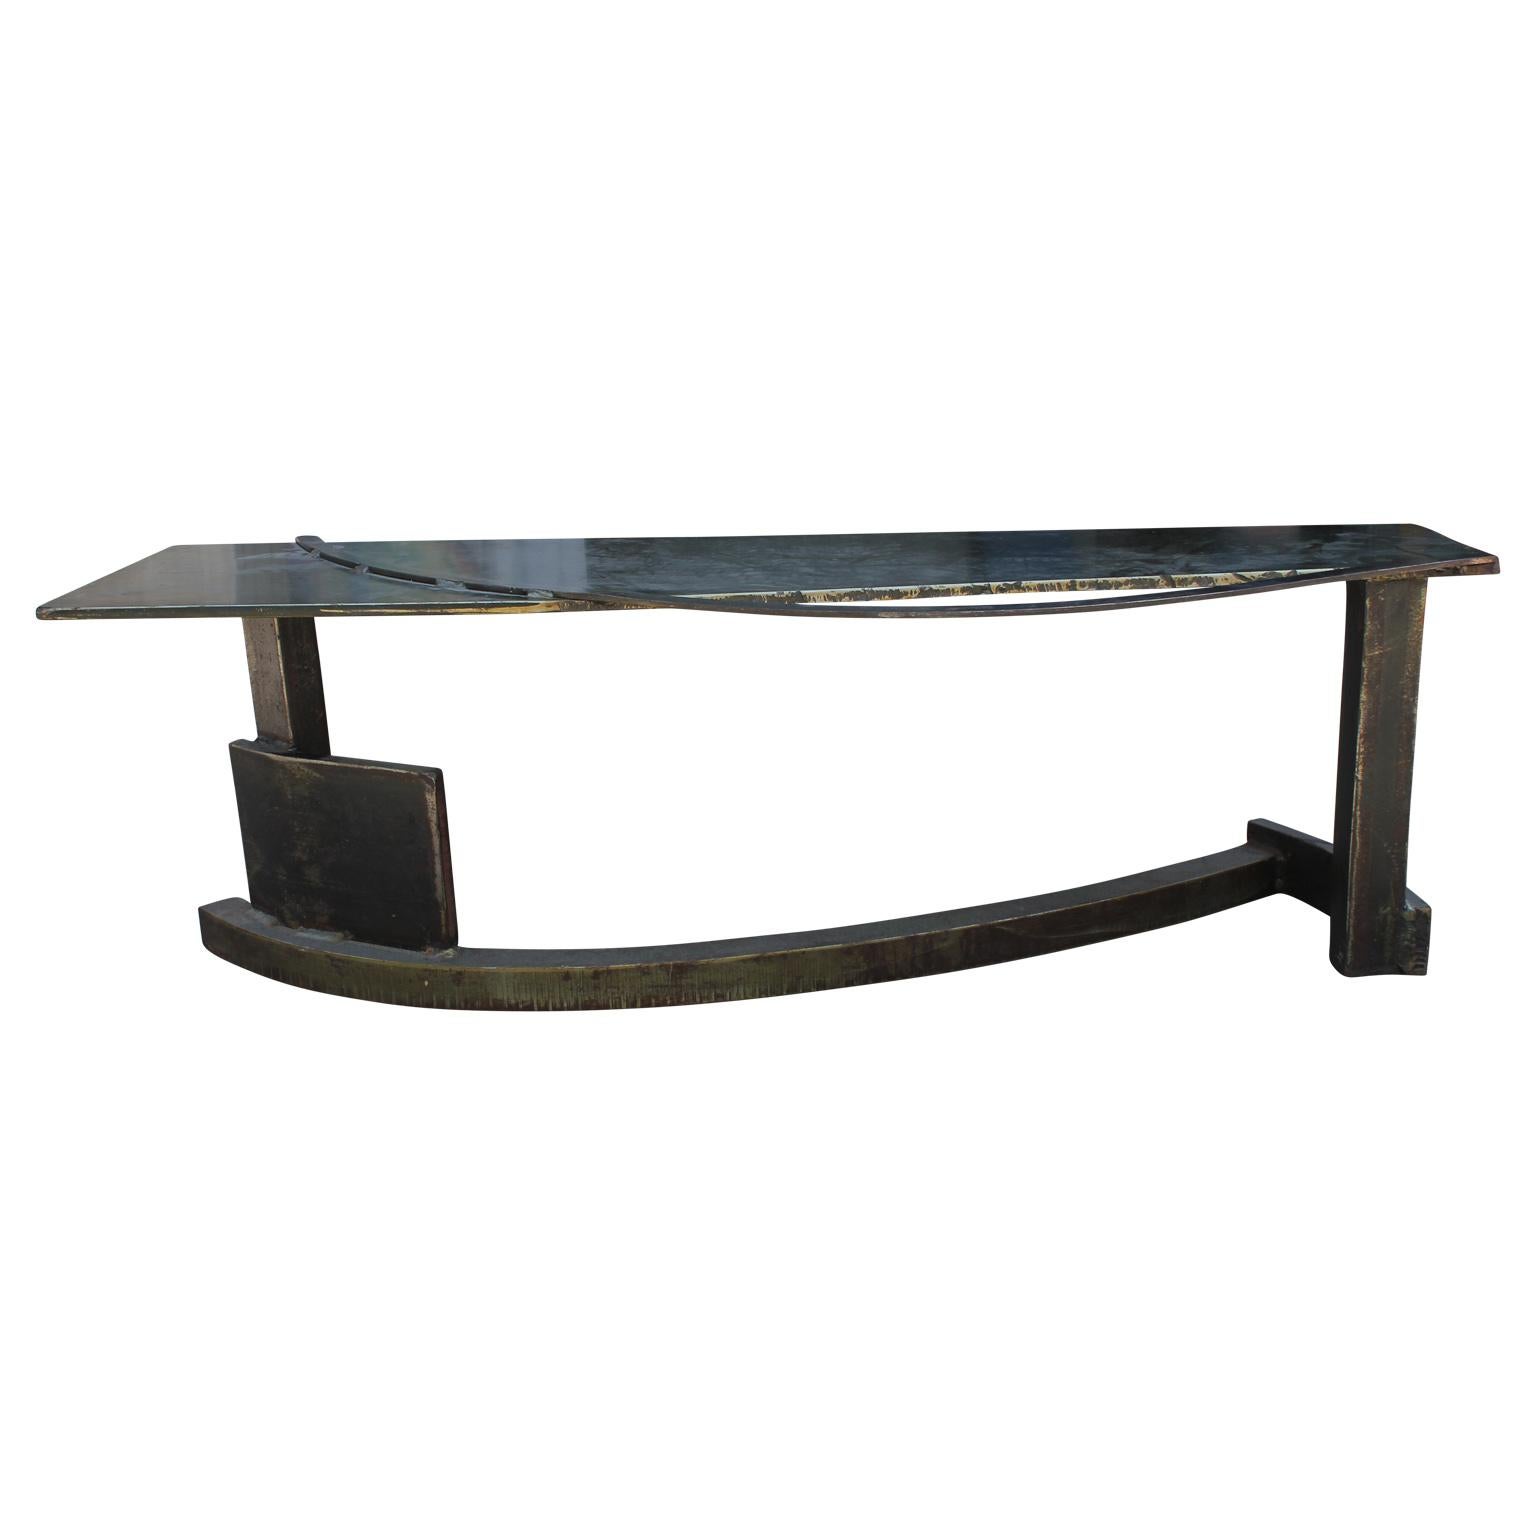 Postmodern / Industrial steel bench that was studio made. An absolute stunner for any space looking for a modern touch.